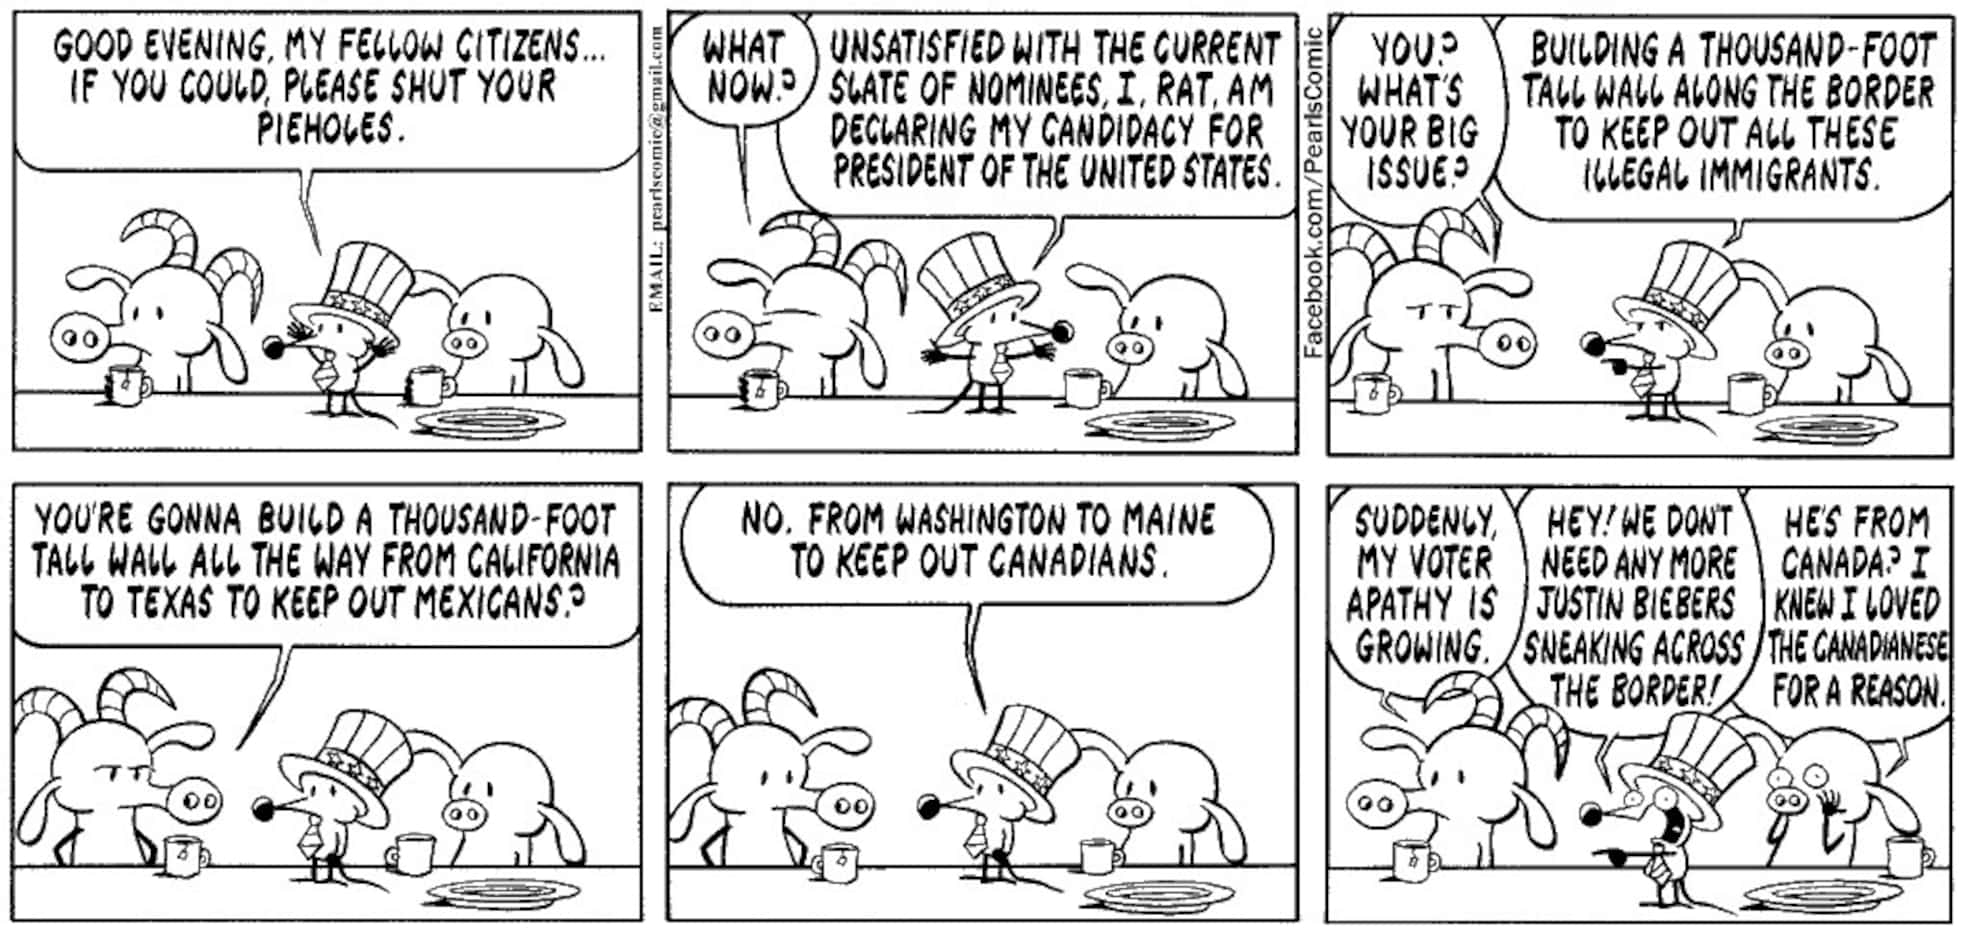 This comic strip was published on Oct. 28, 2012.